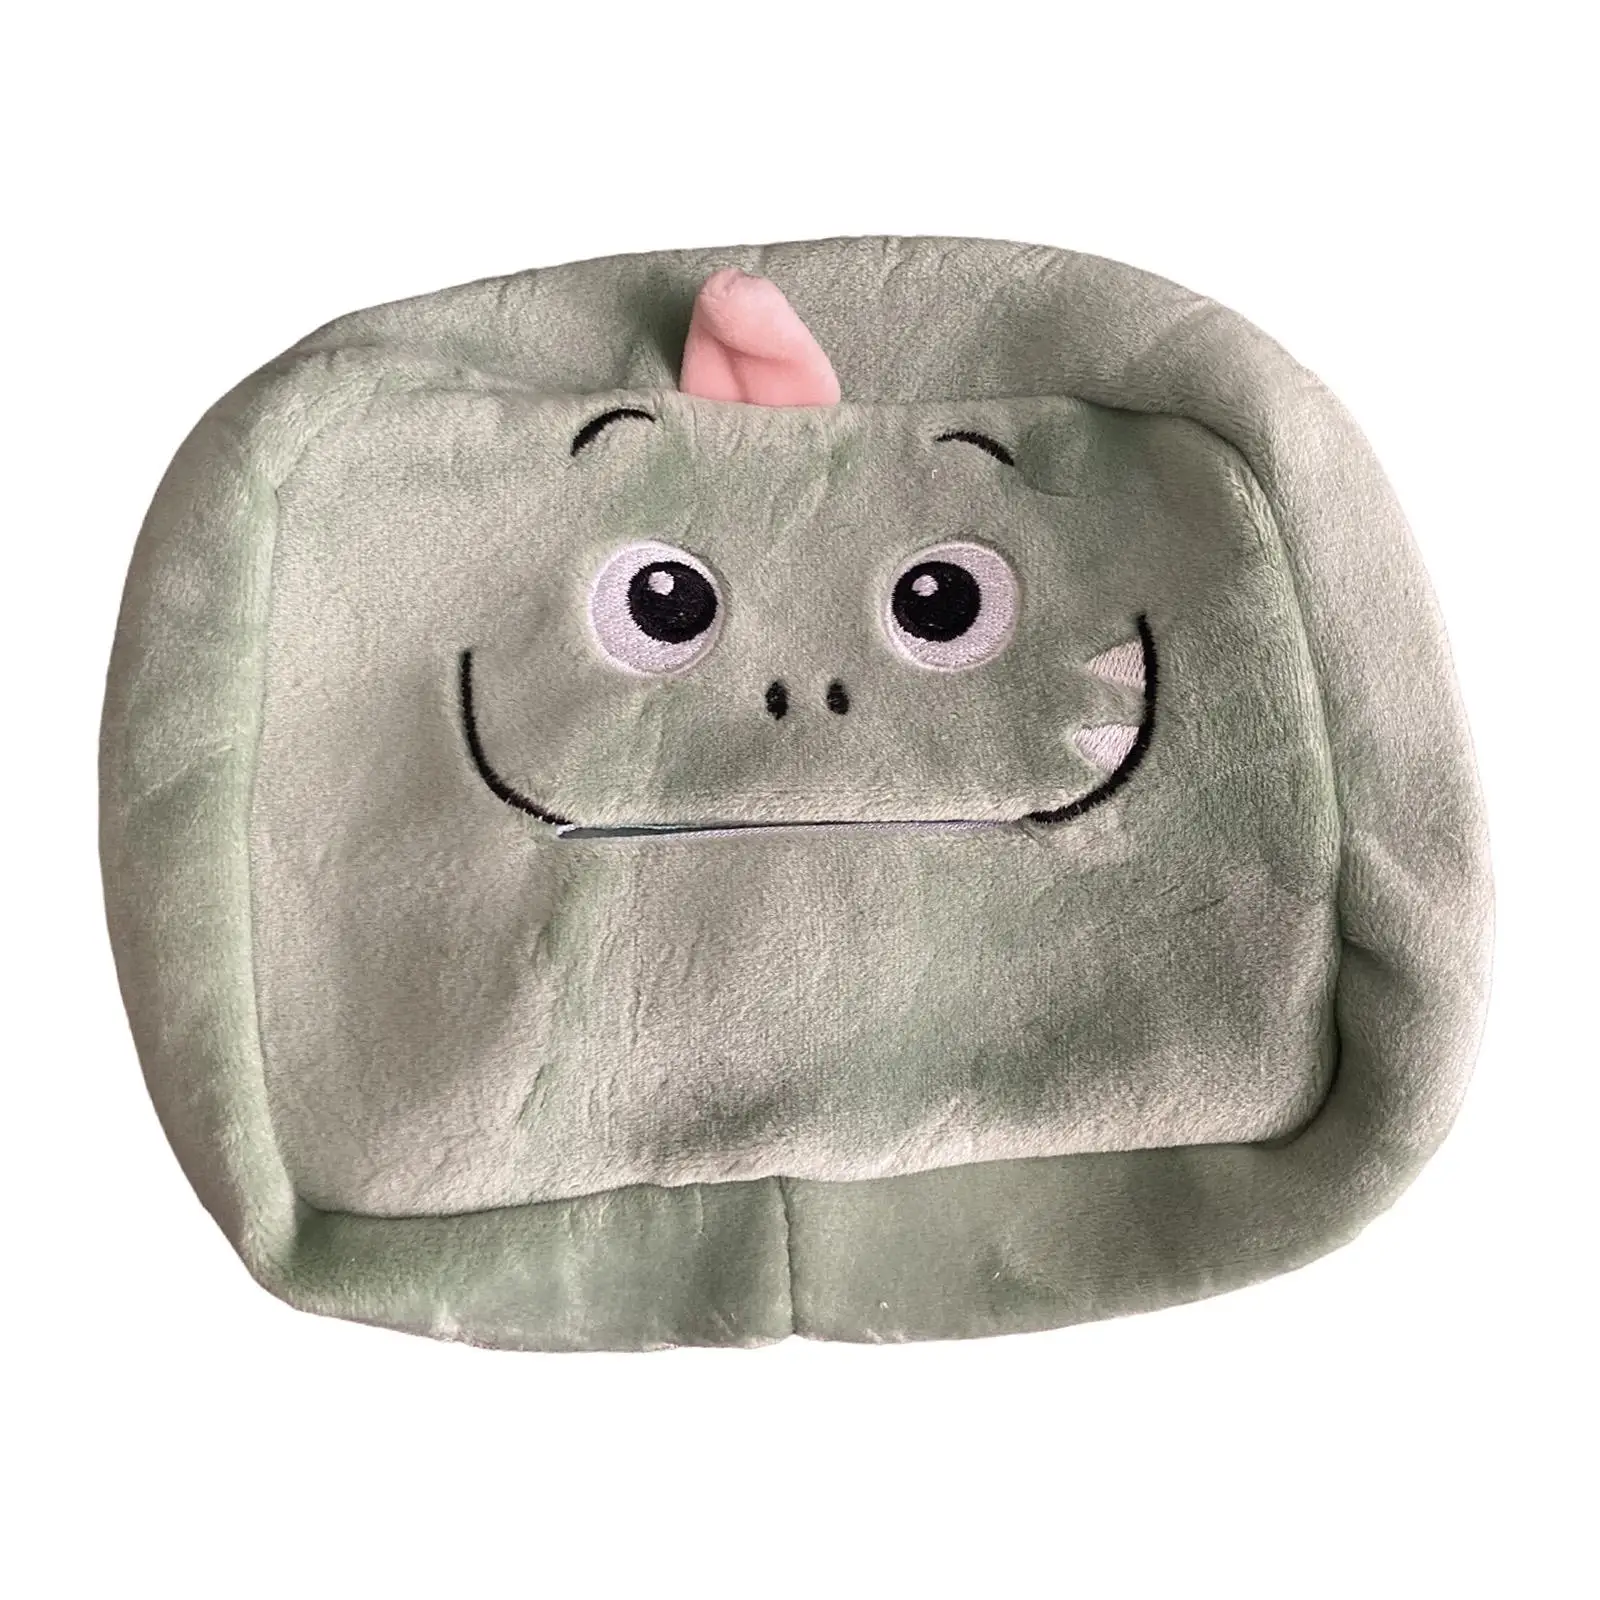  Box Plush Animal Seat Back Home Tissue Bag Paper Package Case